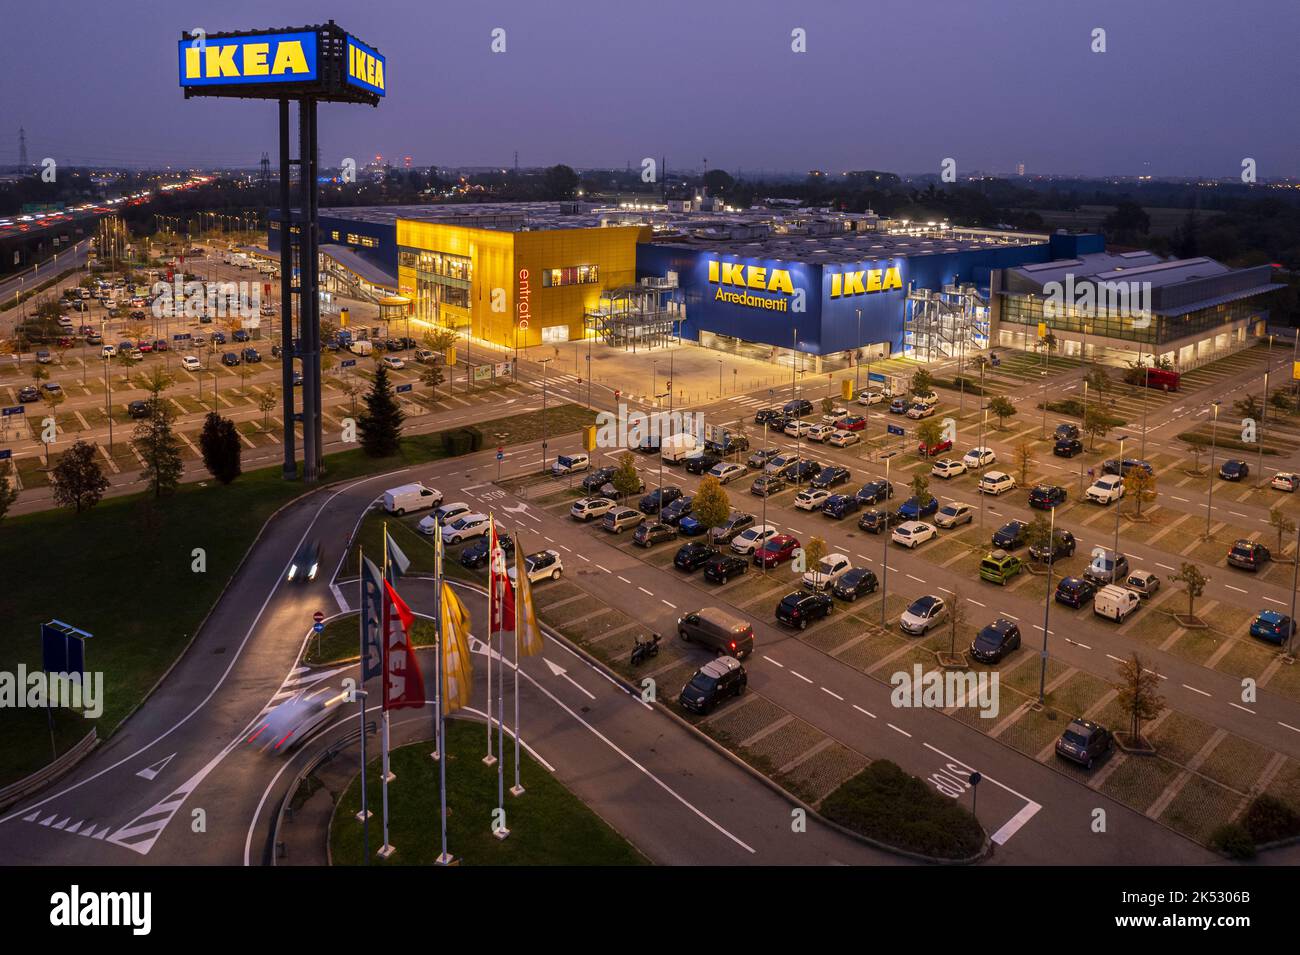 Aerial view of Ikea shopping store with parking slots, night mood. Turin, Italy - October 2022 Stock Photo